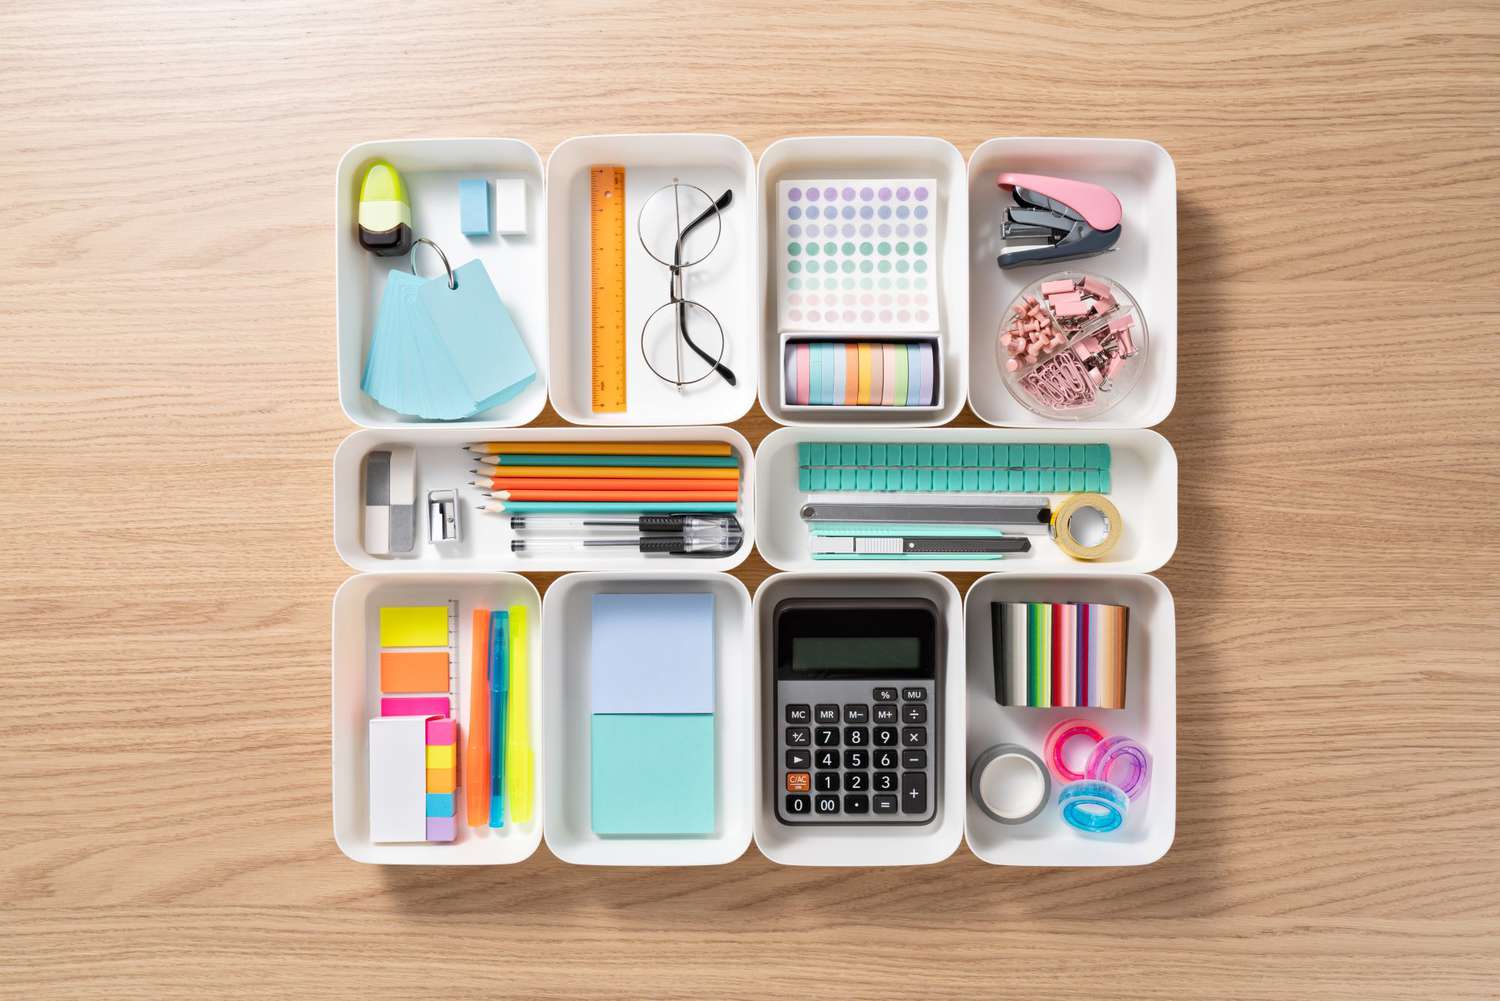 Organize Your Space